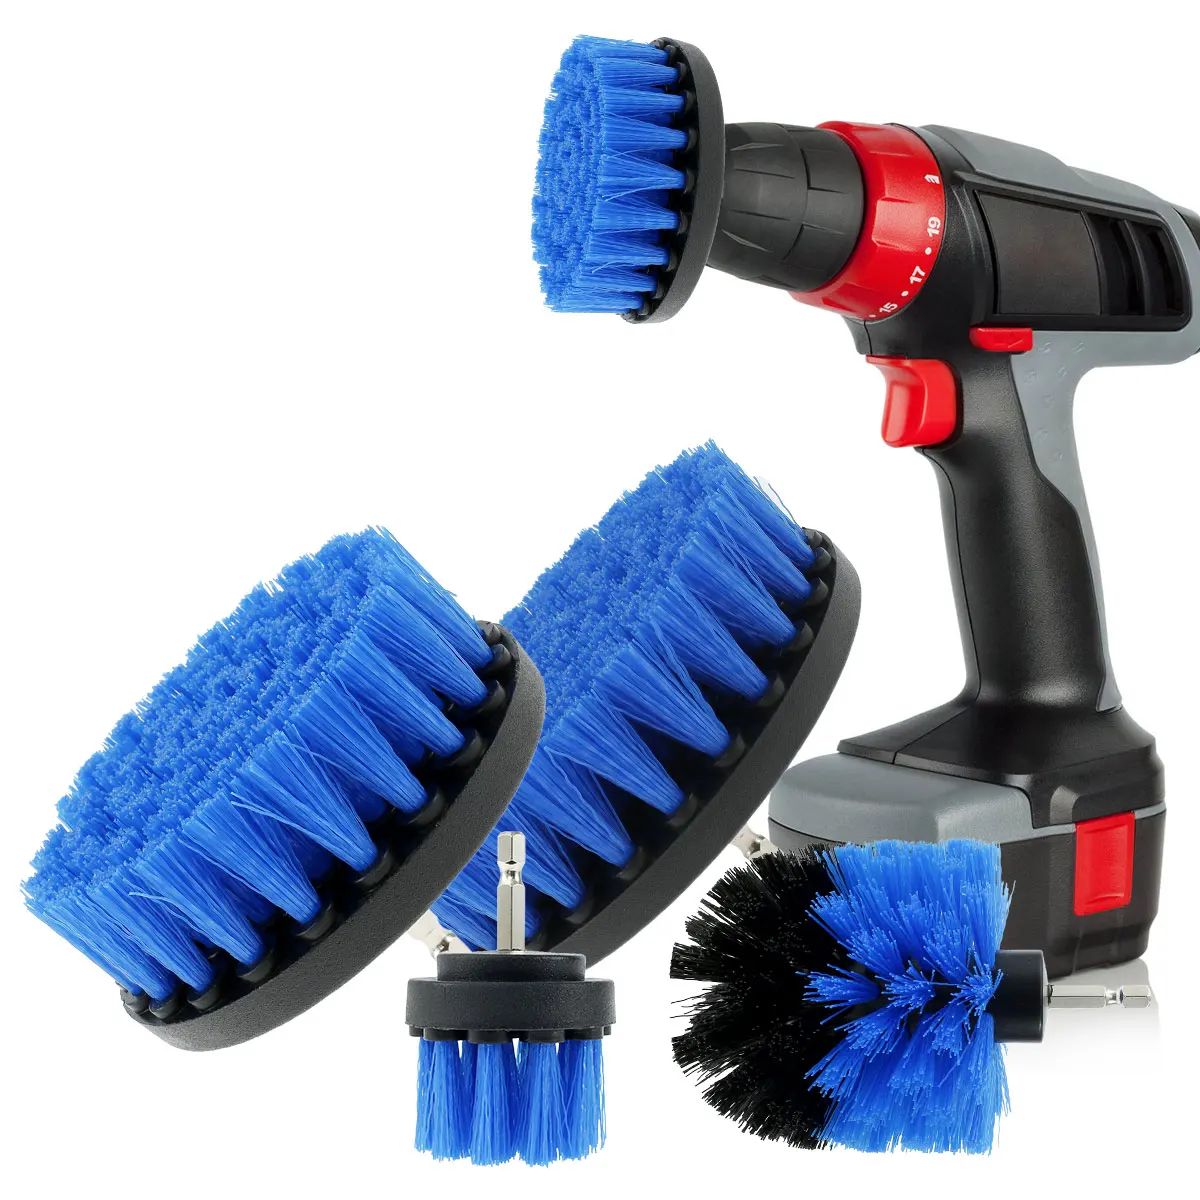 Set Drill Brush Tub Cleaner Grout Power Scrubber Cleaning Combo Tool Scrub Kits 